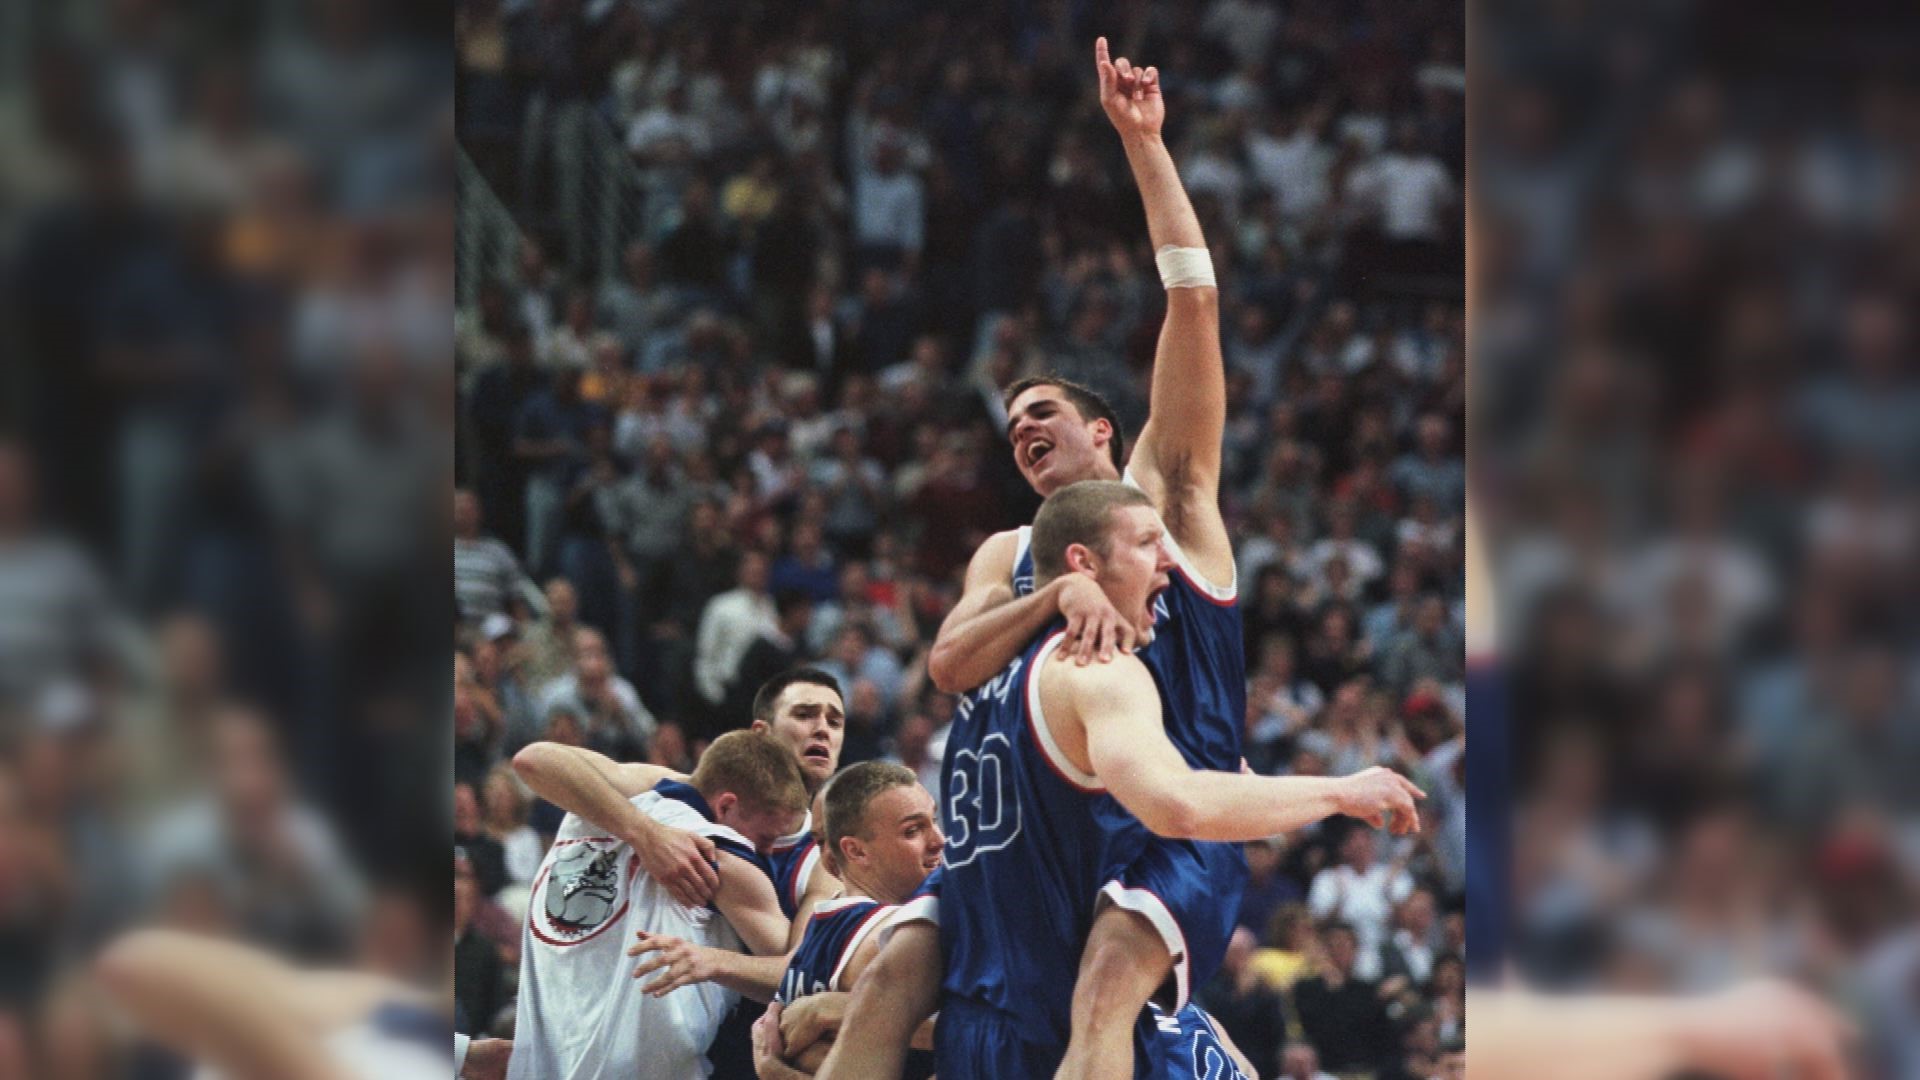 Calvary's shot against Florida in the Sweet 16 in 1999 remains the most famous shot in Gonzaga history. It set in motion the Gonzaga we now know today.